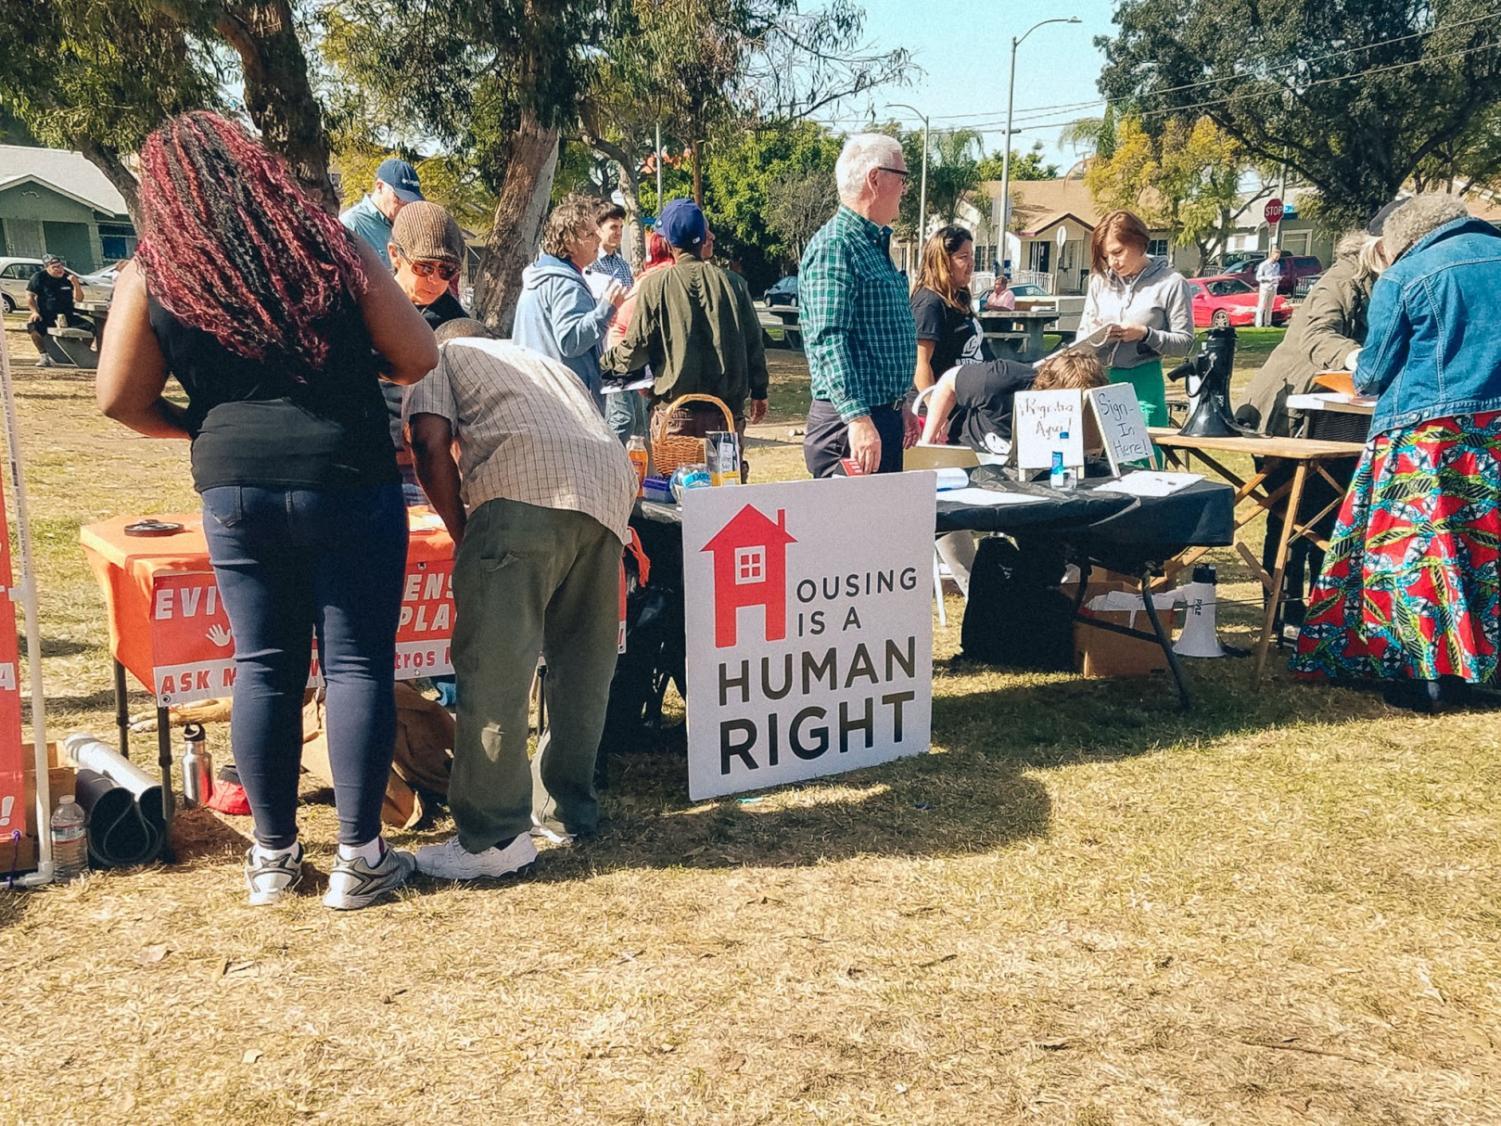 Long Beach residents line up to sign a petition by #RentControlNow at MacArthur Park on Sunday. The petition is aimed at getting rent control to be added to the election ballots this upcoming November.